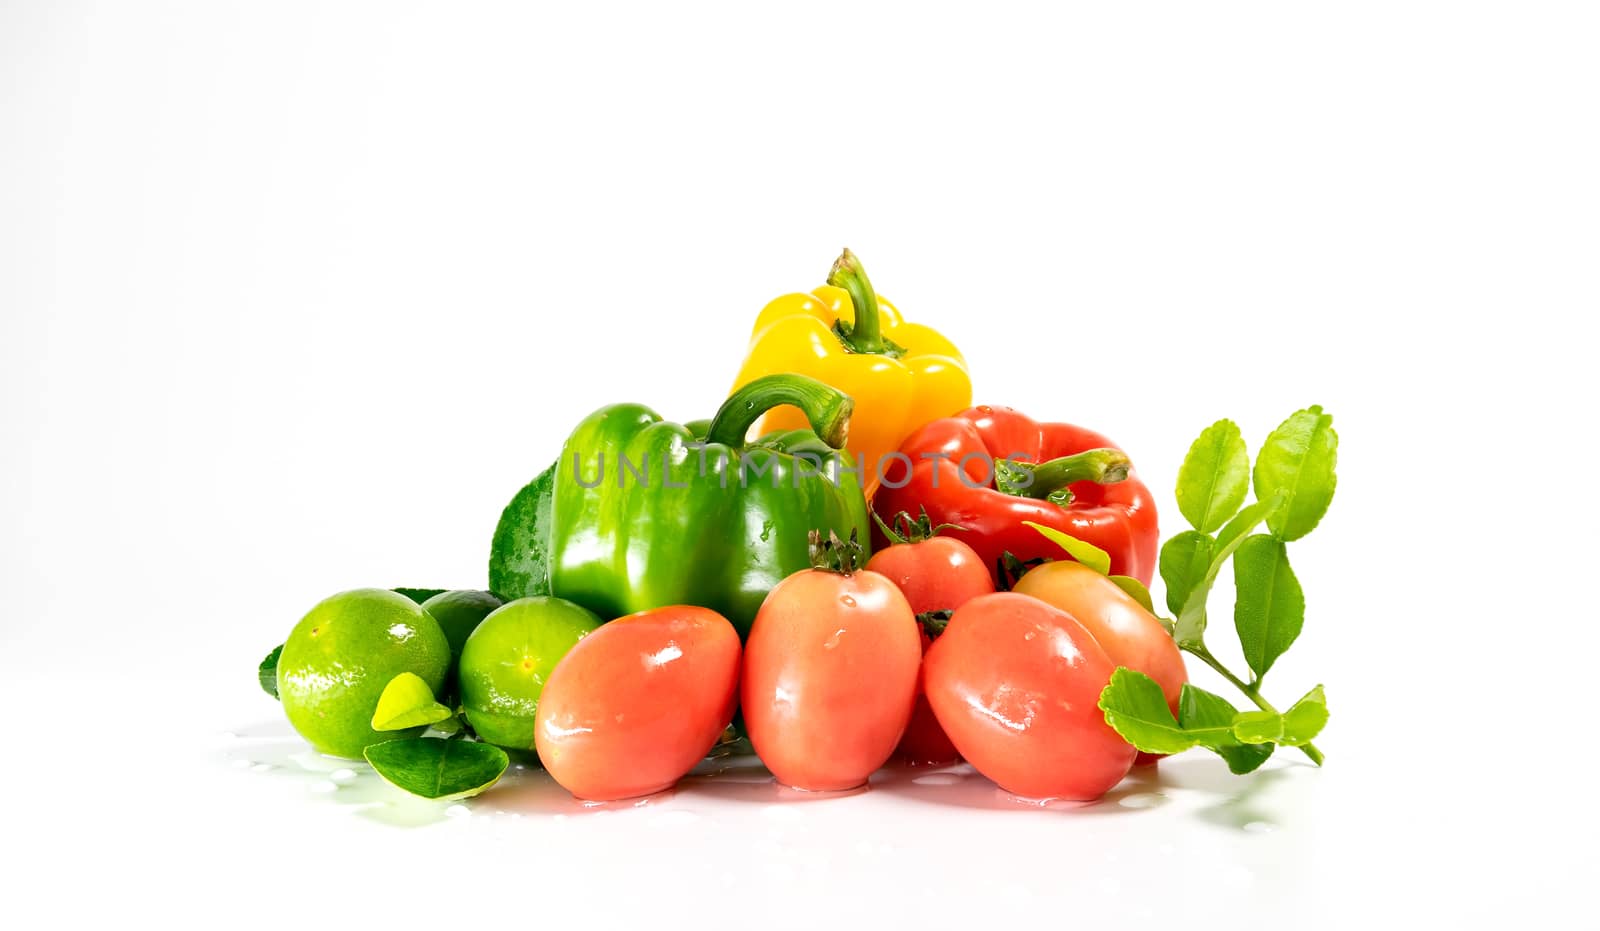 Group of fresh vegetables for cooking isolated on white background.